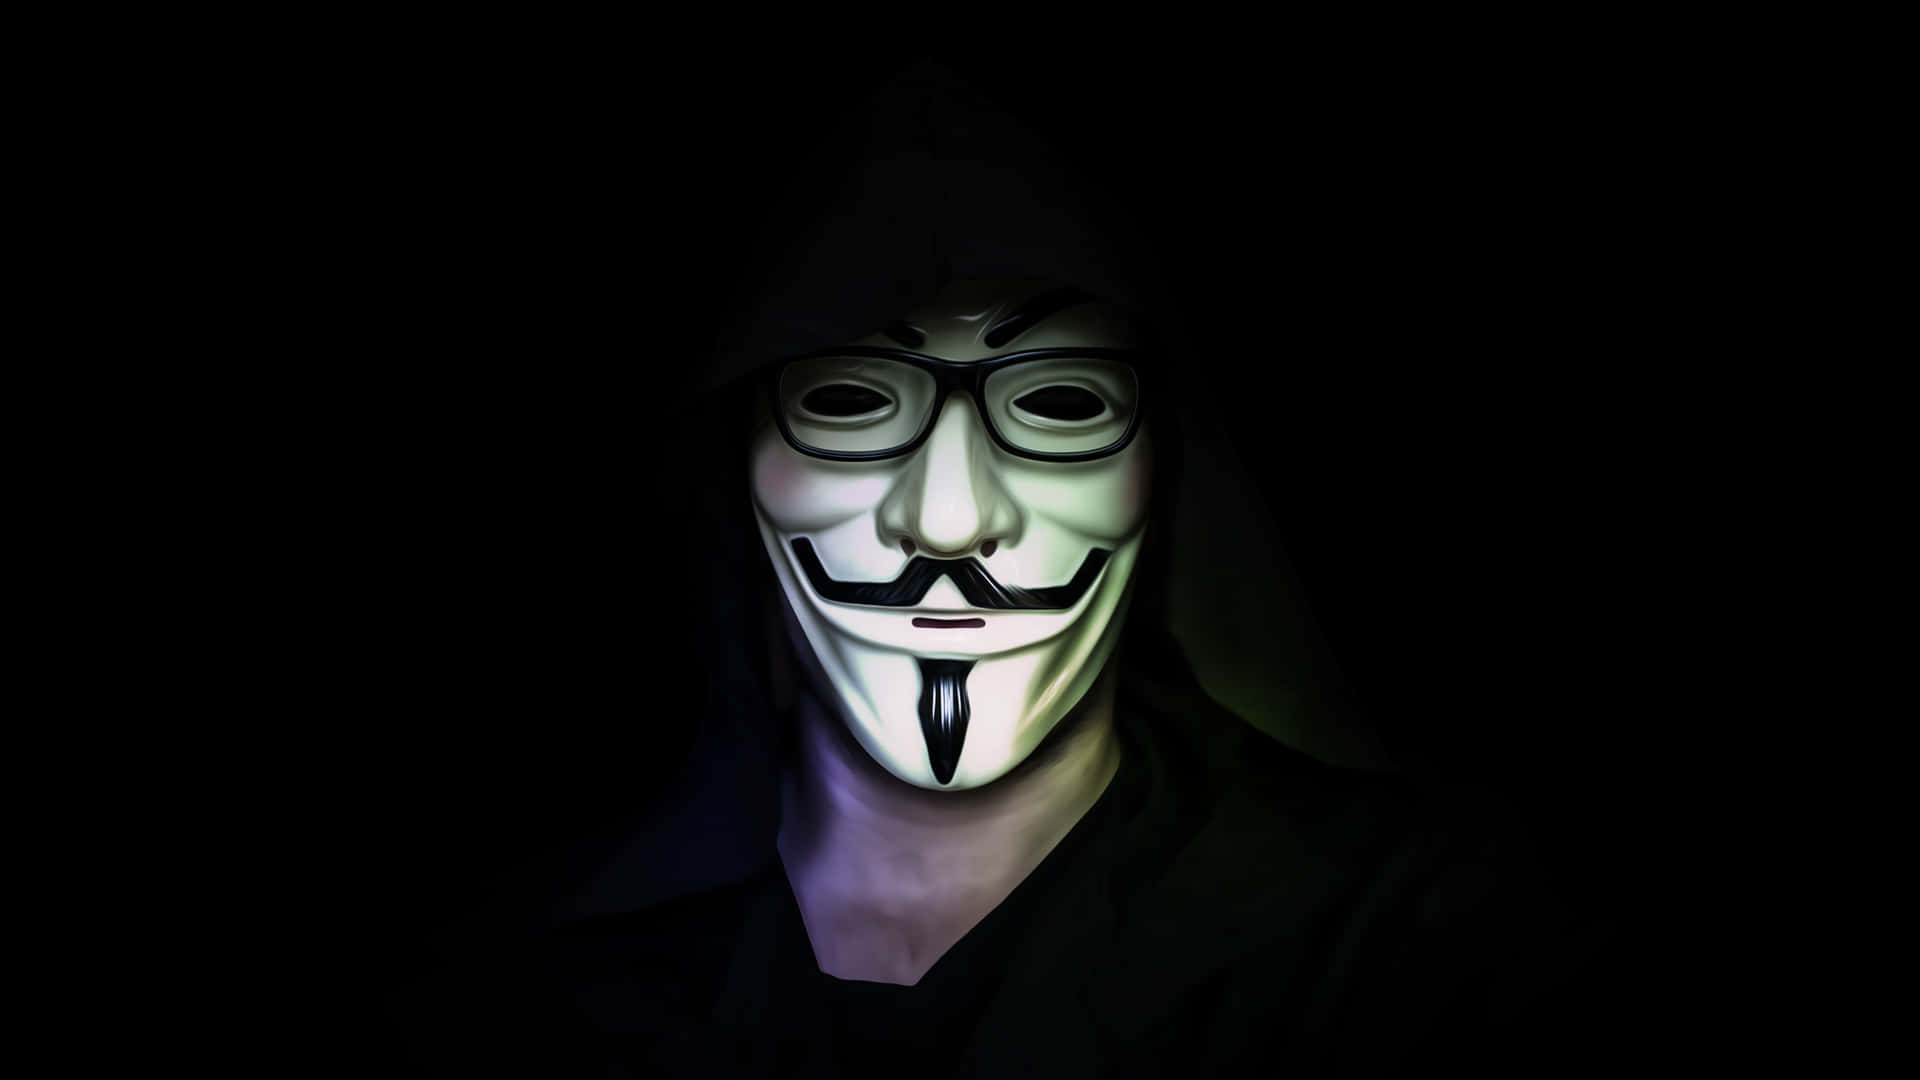 Creepy 4k Mask Anonymous With Glasses Wallpaper